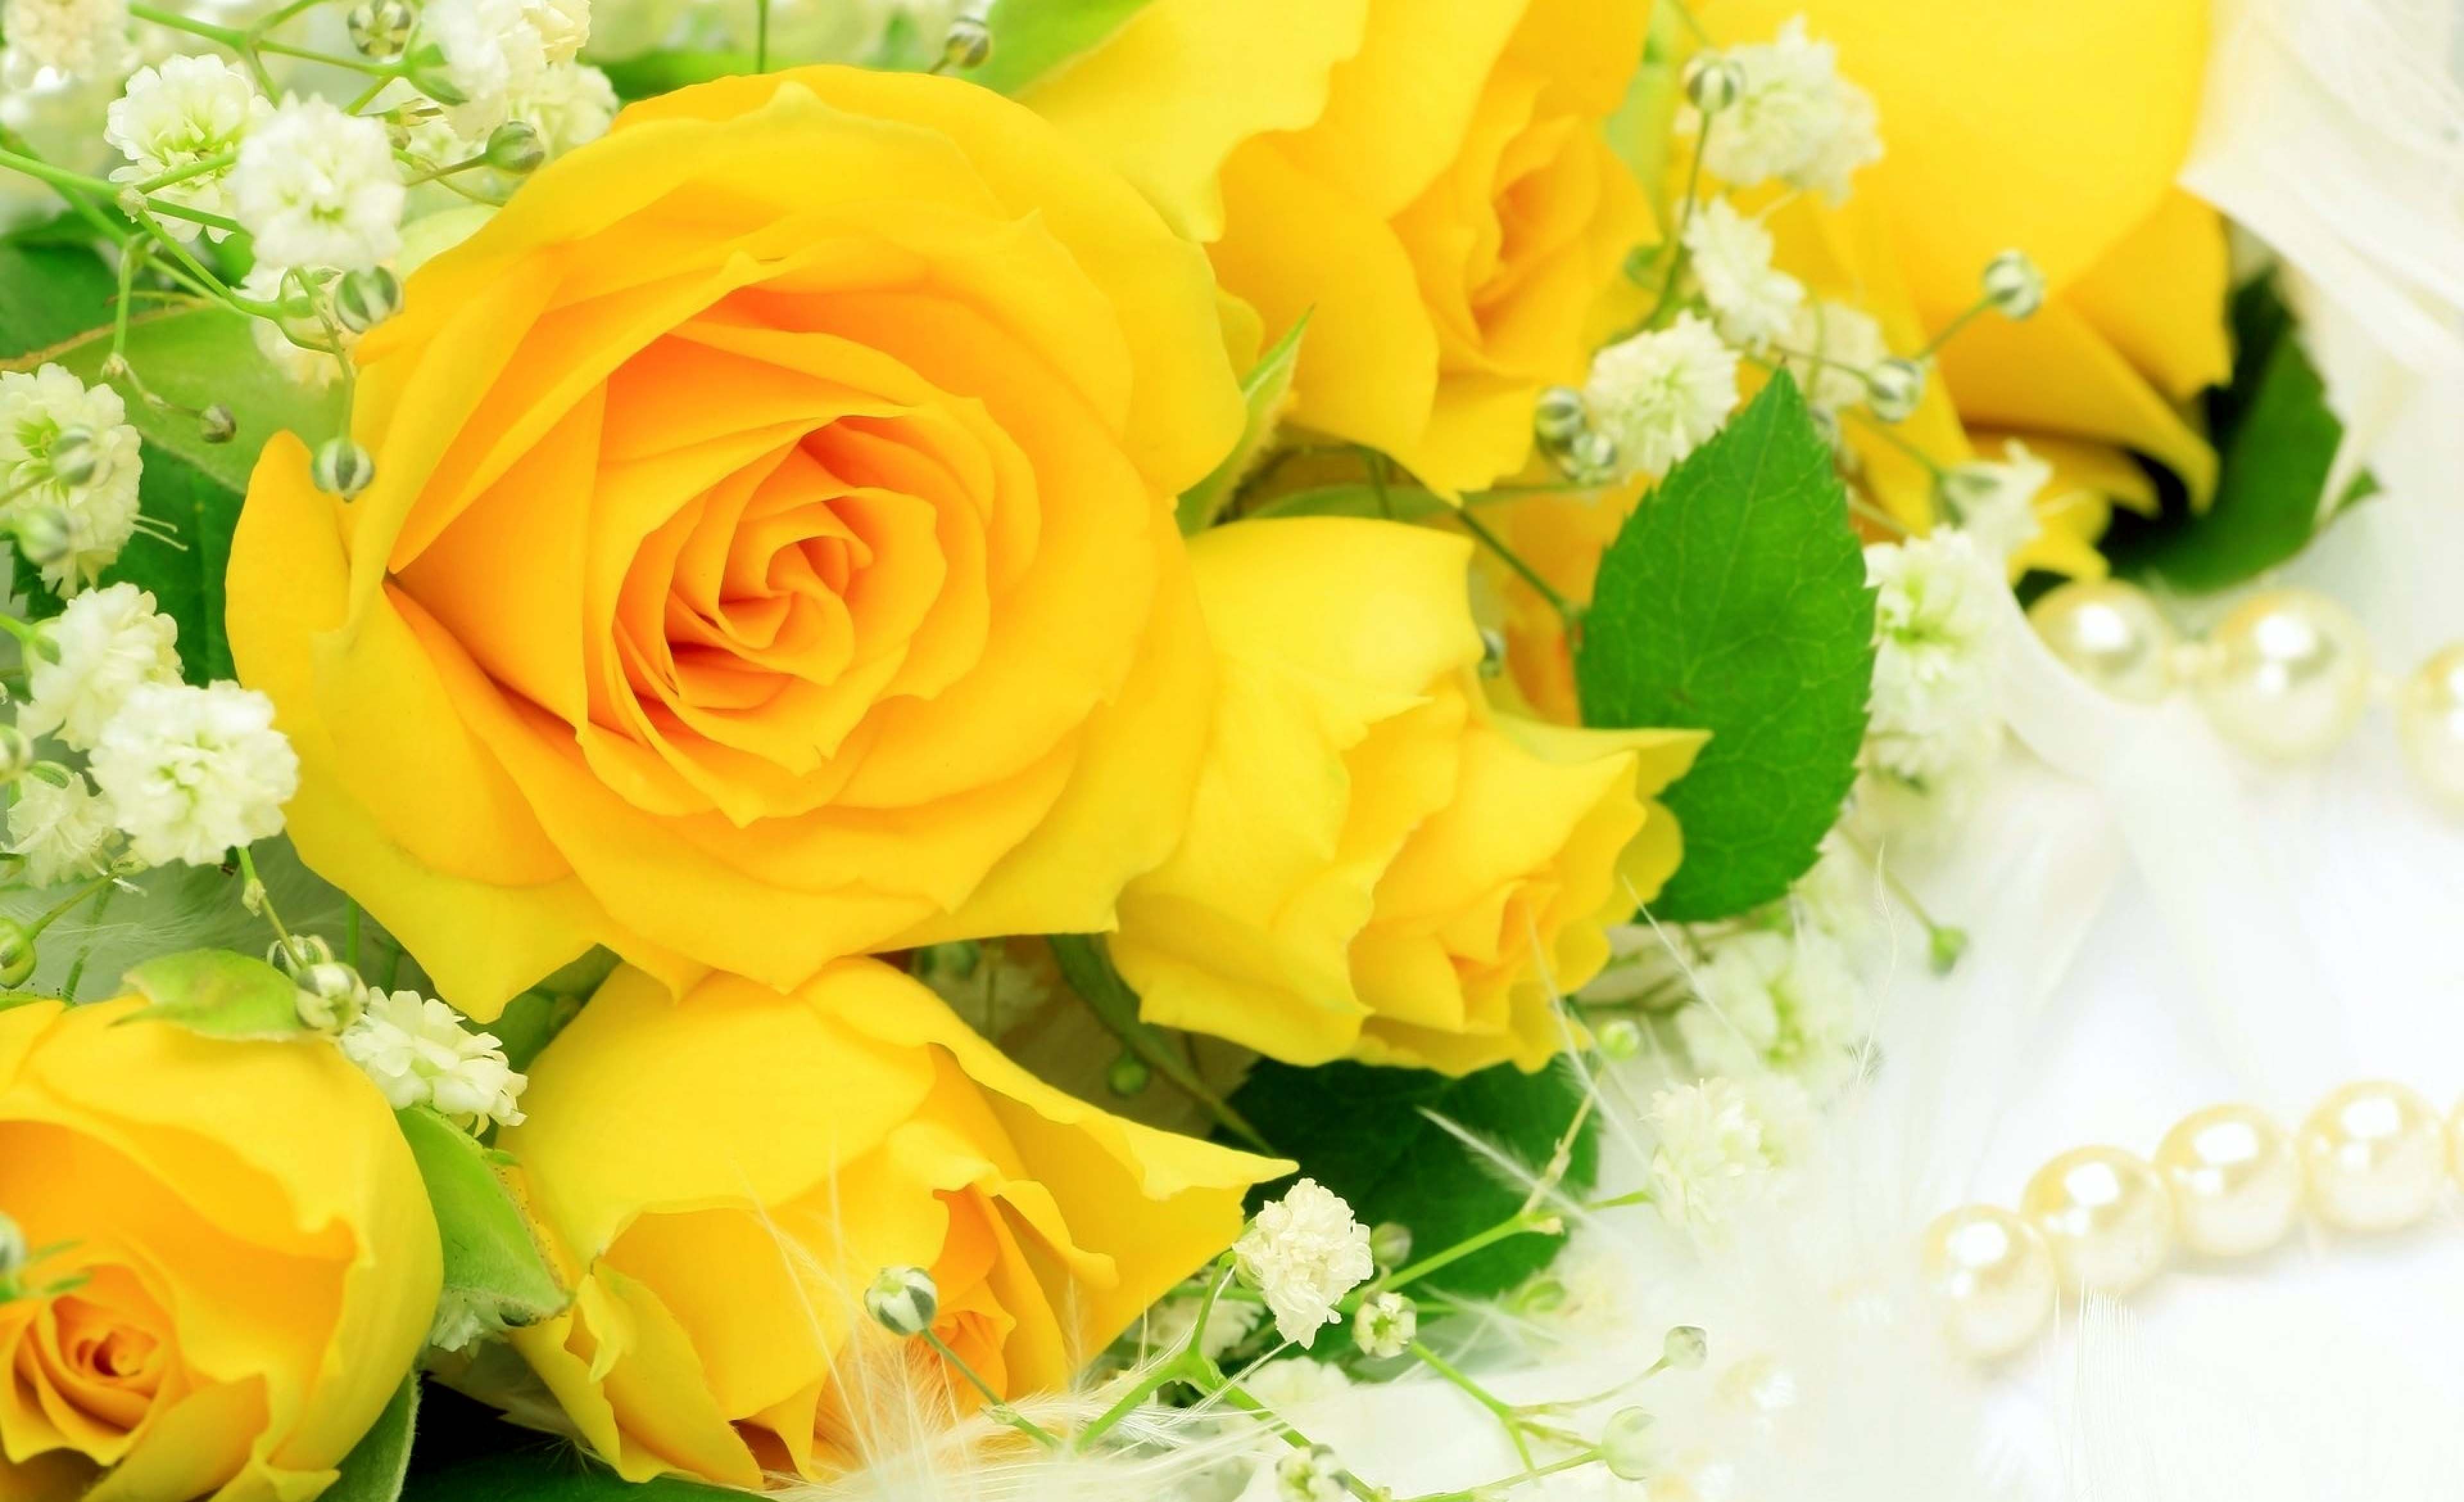 3840x2340 Free download Stunning Yellow Roses Natural Beauty Image HD Wallpaper [3840x2340] for your Desktop, Mobile & Tablet. Explore Yellow Rose Flower Wallpaper. Rose Flowers Wallpaper Free Download, Yellow Flowers on WallpaperBat